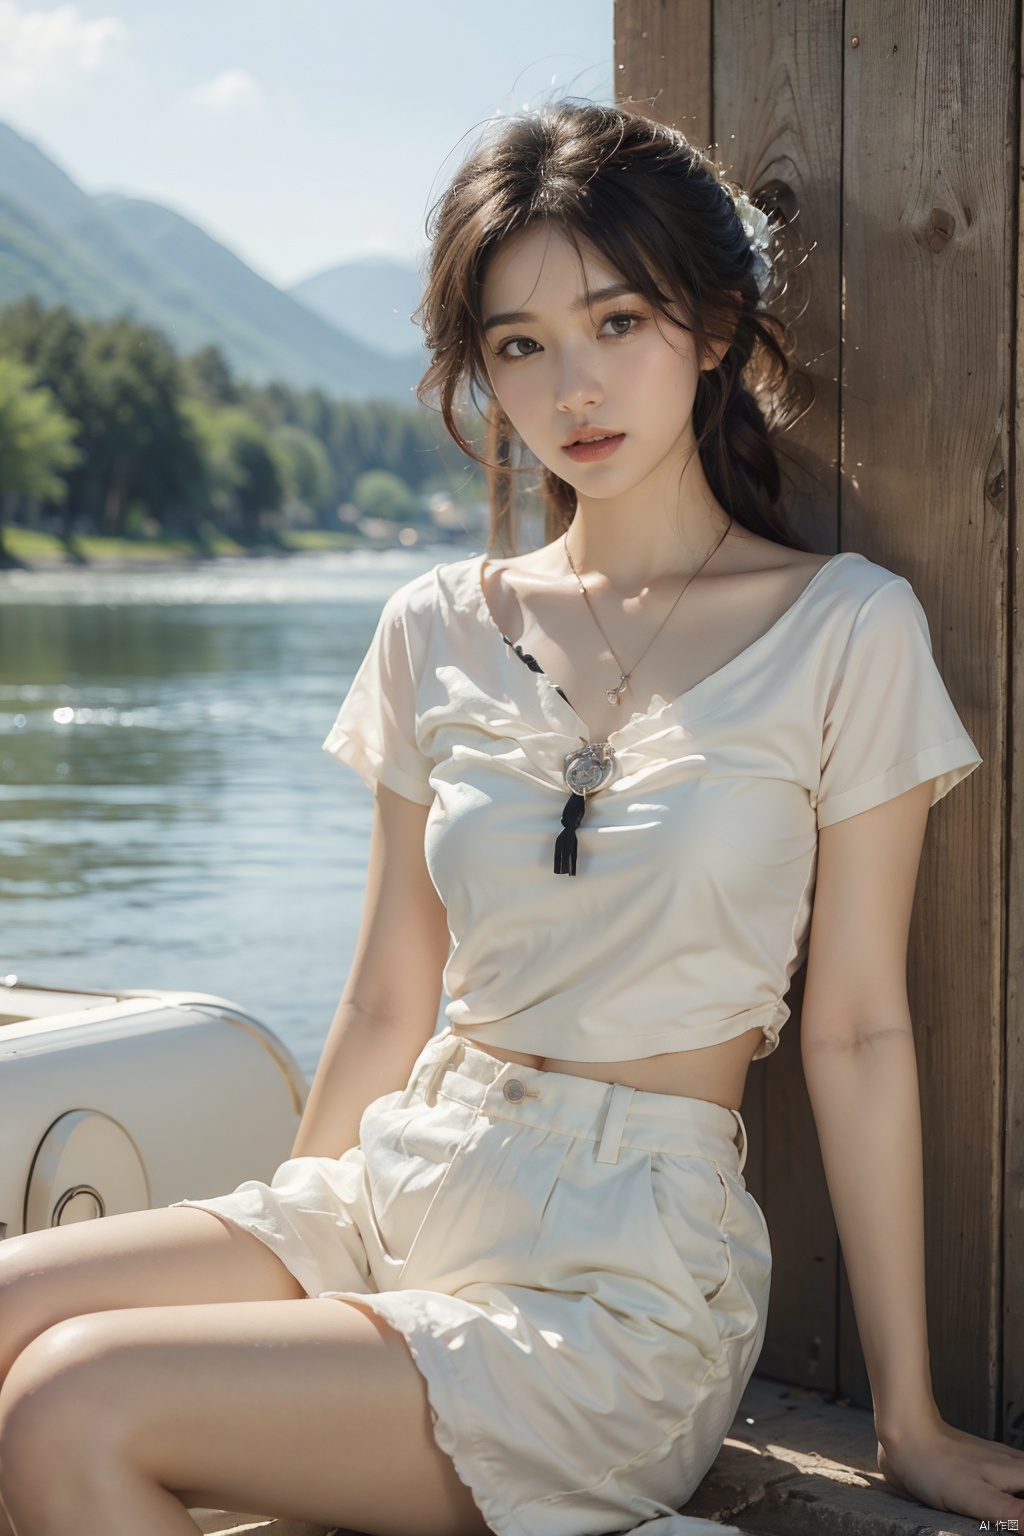  (Best quality, High resolution, Masterpiece :1.3), A pretty woman with slim figure, Breasts, (Dark brown layered haircut), Wearing pendant, T-shirt, White shorts, Outdoor, Great view, Lake and mountains in distant background, Details exquisitely rendered in the face and skin texture, Detailed eyes, Double eyelid, (/qingning/), jiqing, babata, mtianmei, (\MBTI\)